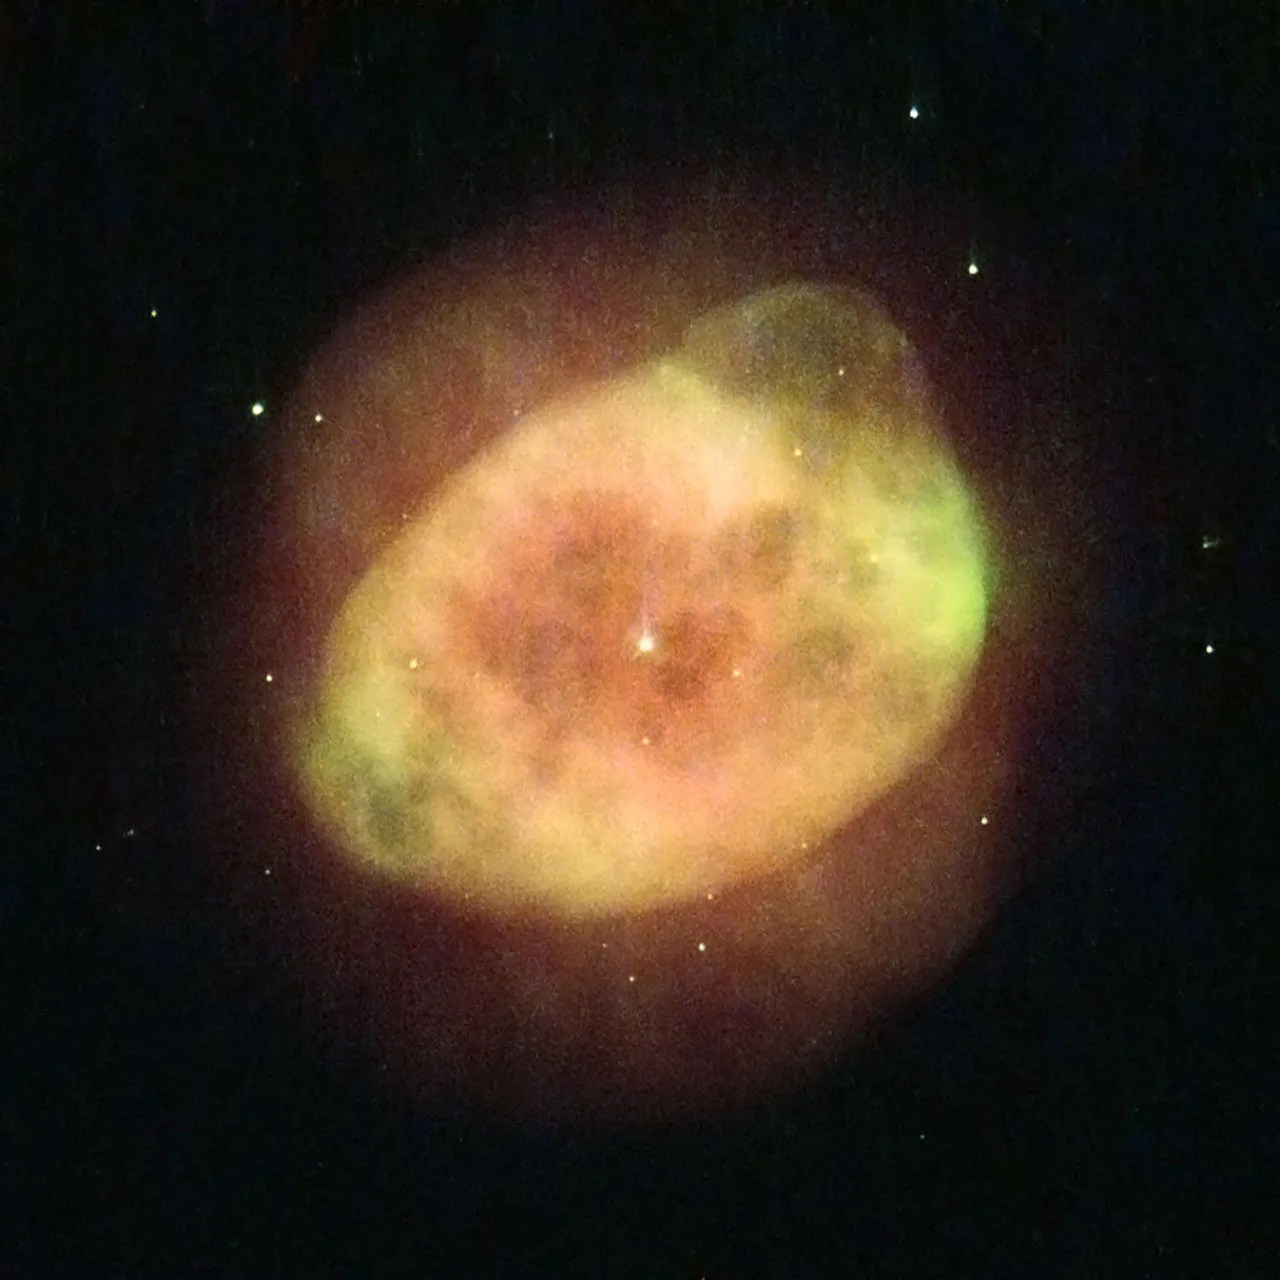 Large, yellow-orange gas cloud, with smaller, brighter cloud inside and single bright star in the center